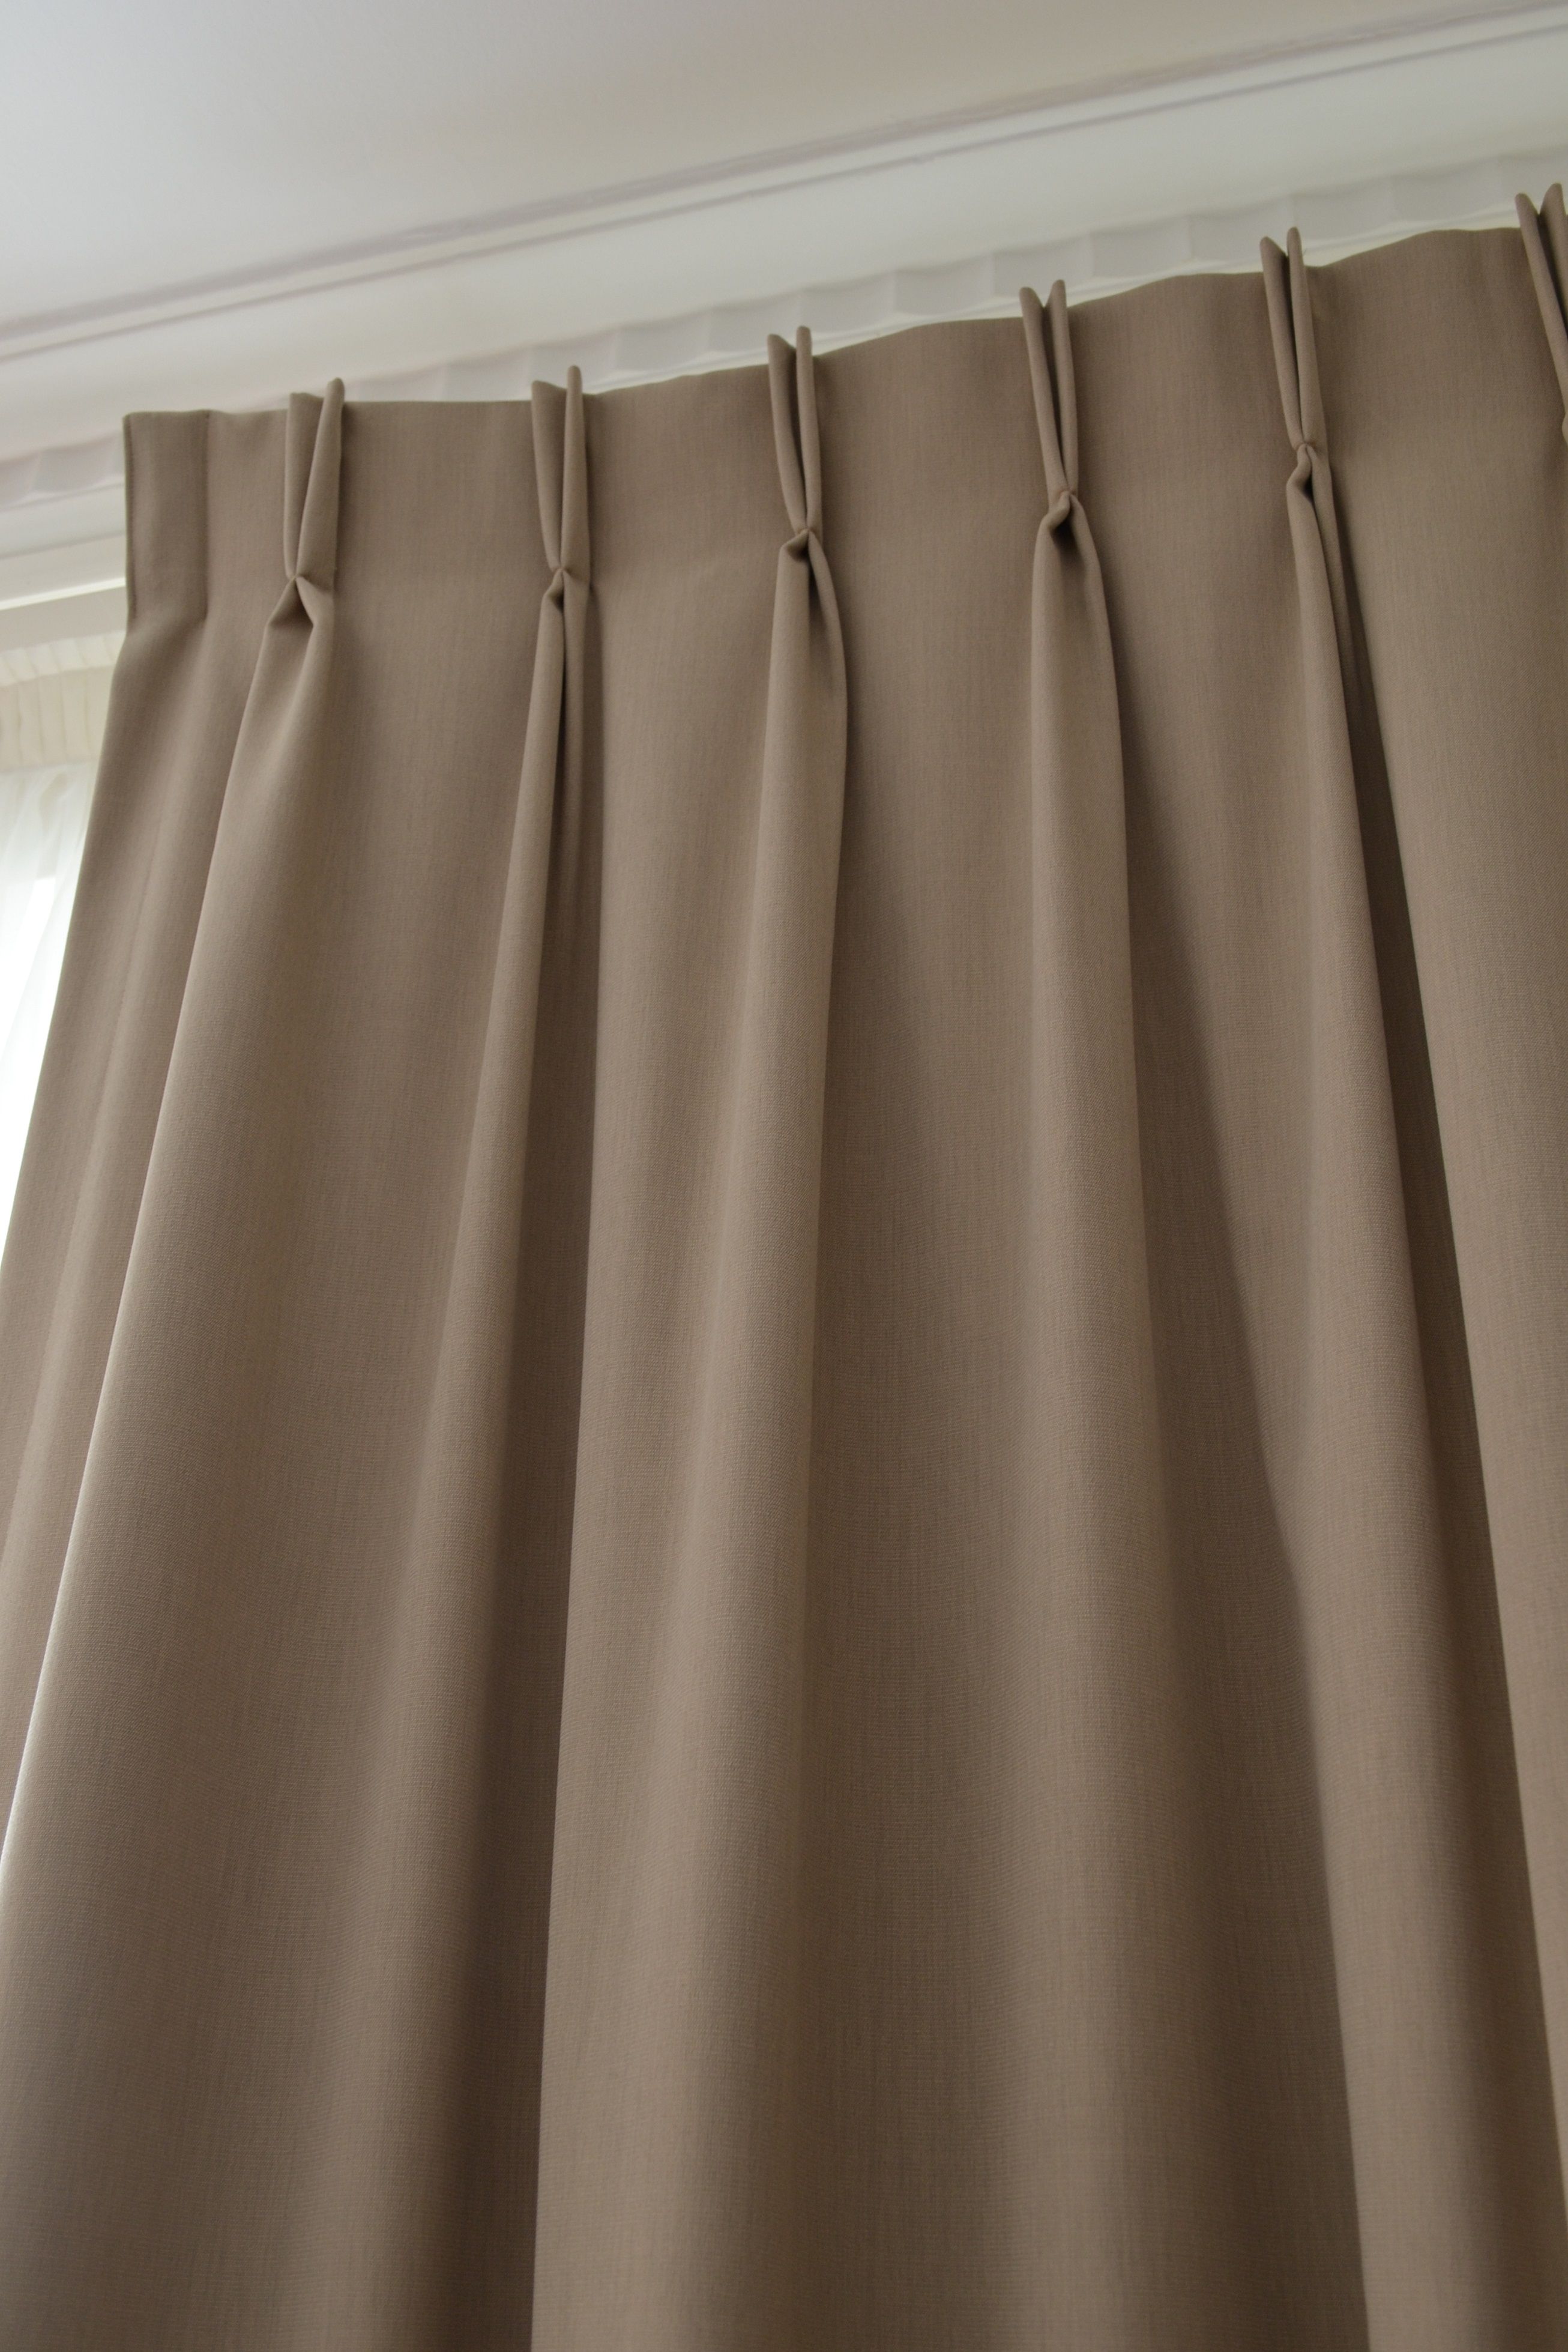 Double Pinch Pleat Curtains Curtains Pinterest Curtains With Regard To Double Pinch Pleat Curtains (View 4 of 15)